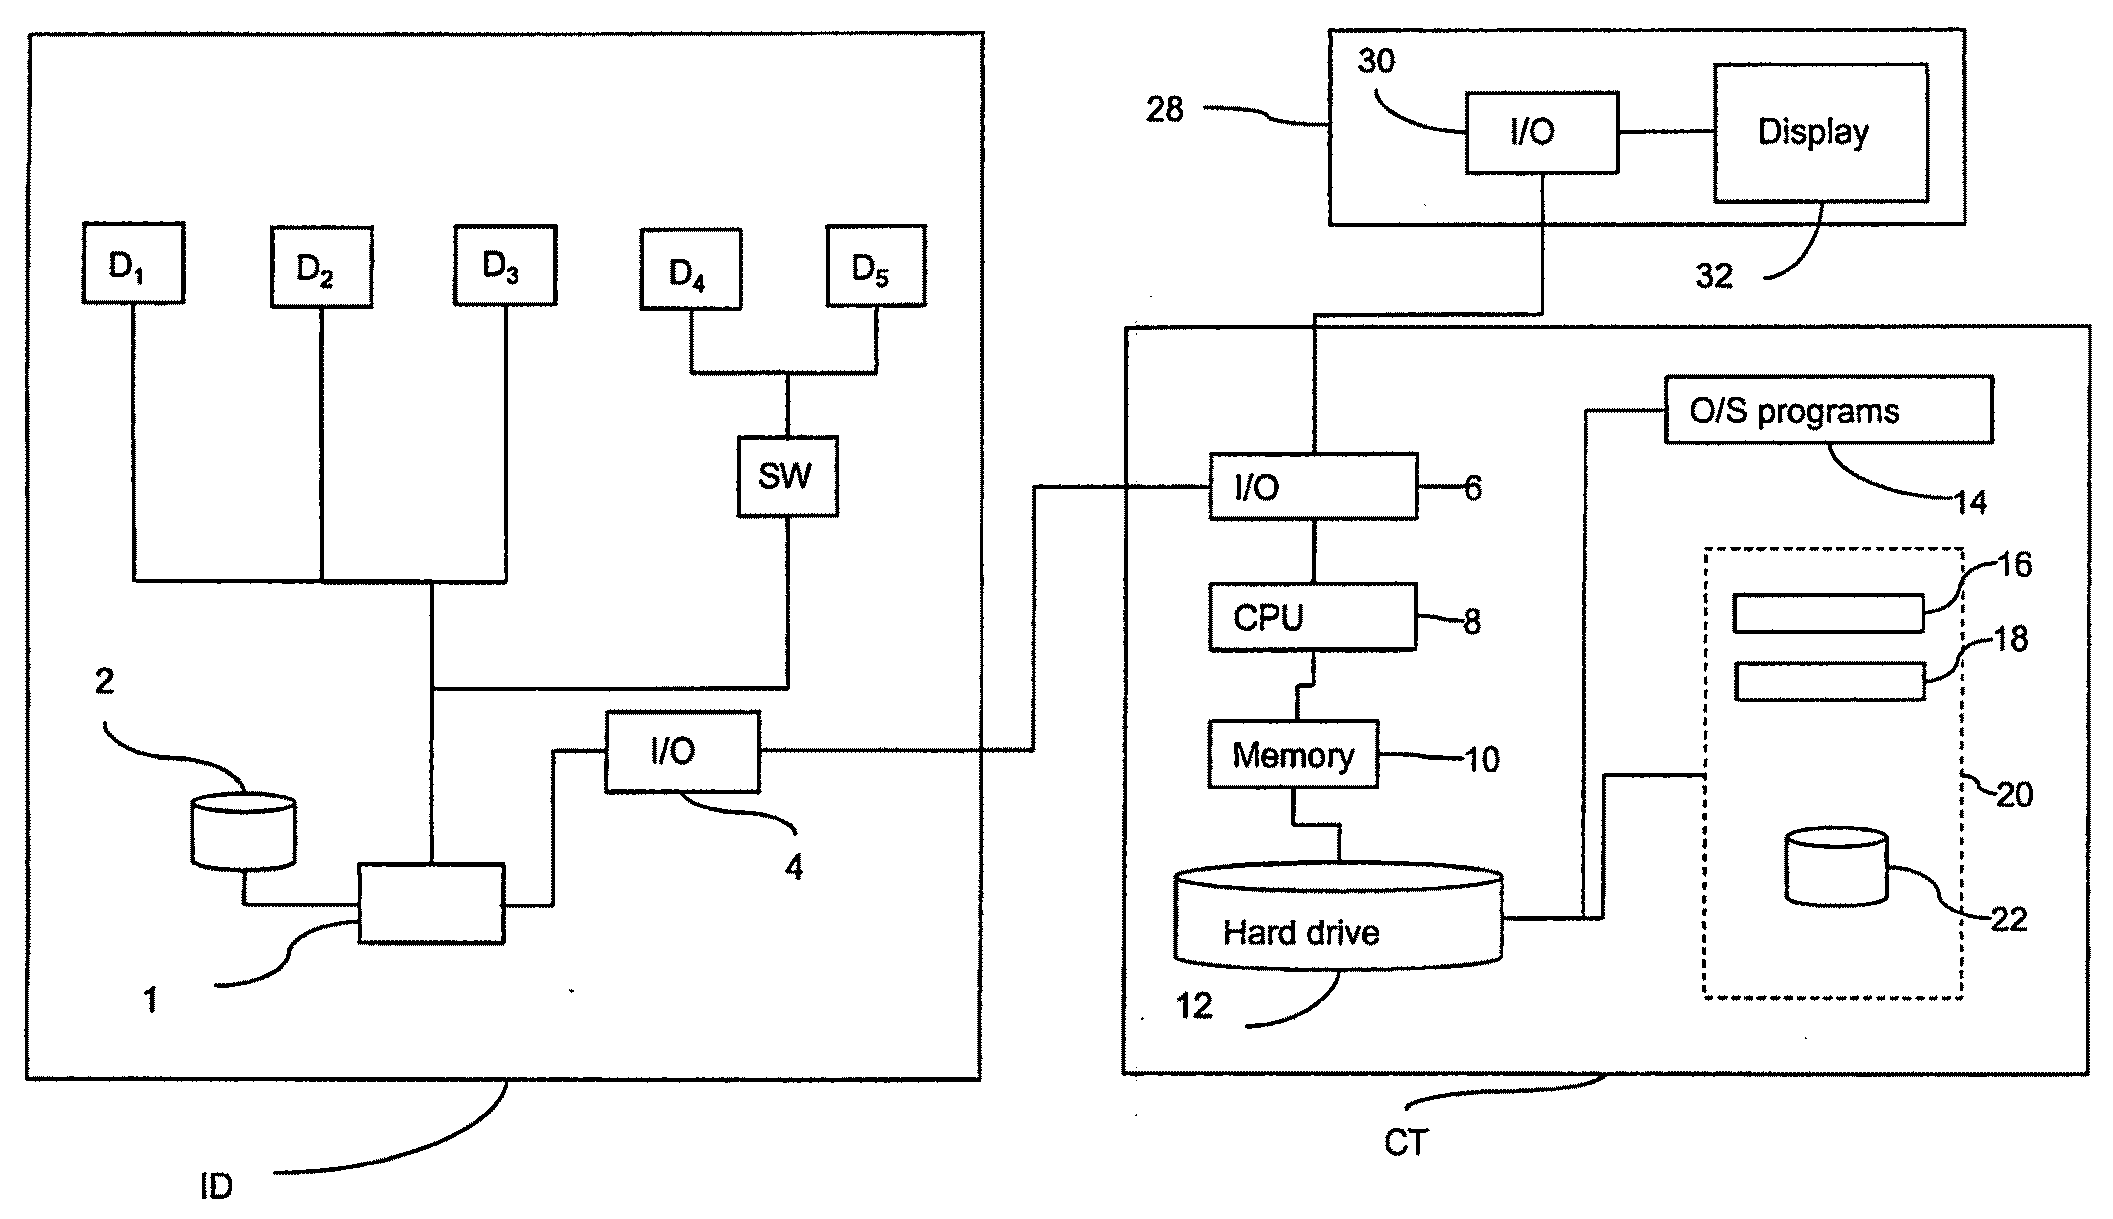 Method of, and apparatus and computer software for, imaging biological objects